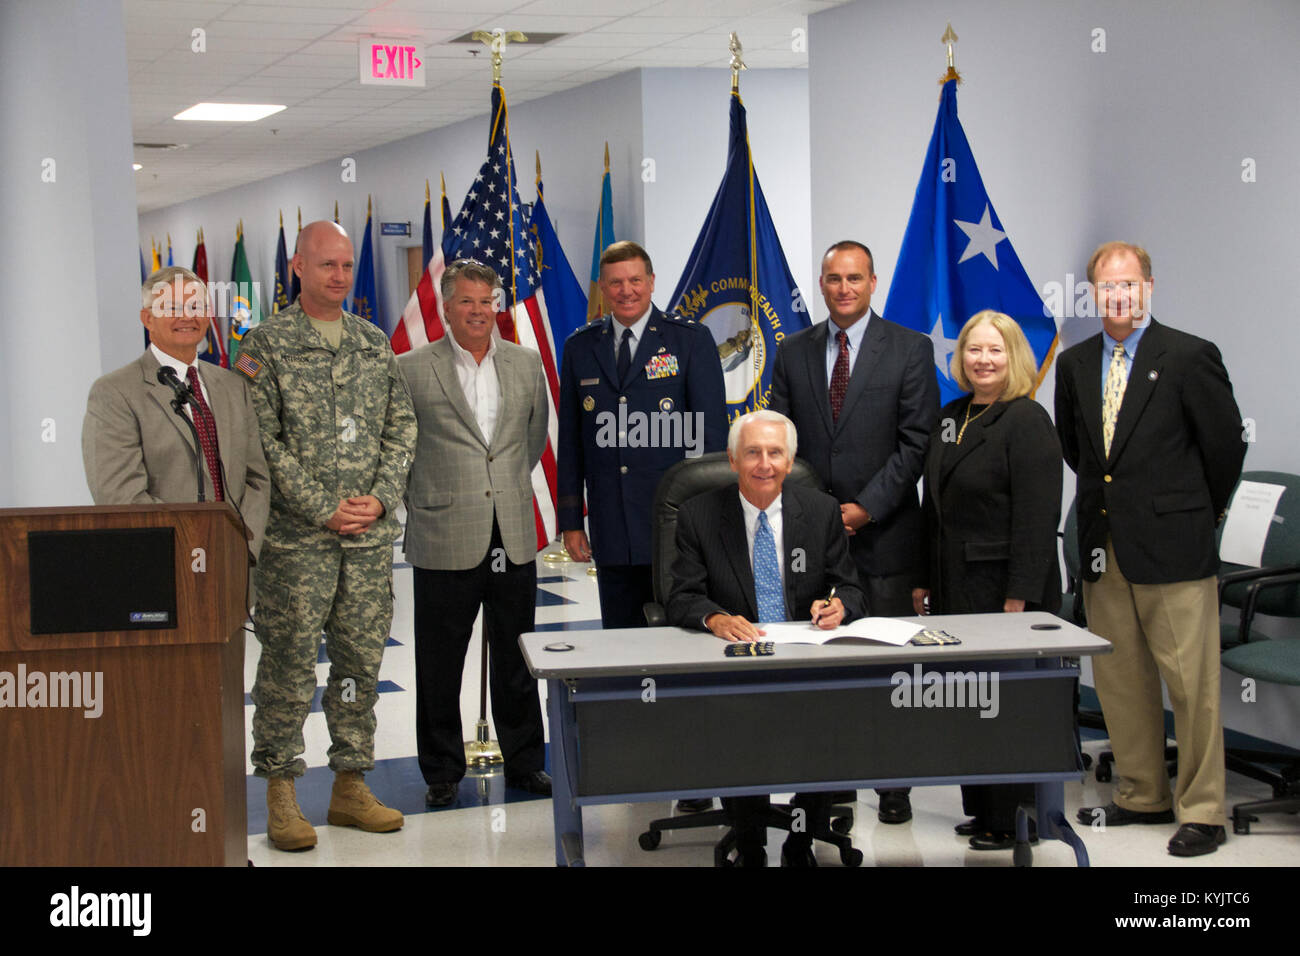 Governor Steve Beshear ceremoniously signs House Bill 318, co-sponsored by State Representative Ruth Ann Palumbo and State Senator R.J. Palmer at Bluegrass Station in Lexington, Ky., Sept. 3. The bill will foster economic development by providing high wage jobs and supporting the military throughout the commonwealth according to Rep. Palumbo. (U.S. Army National Guard photo by Maj. Stephen Martin, Kentucky National Guard Public Affairs) Stock Photo